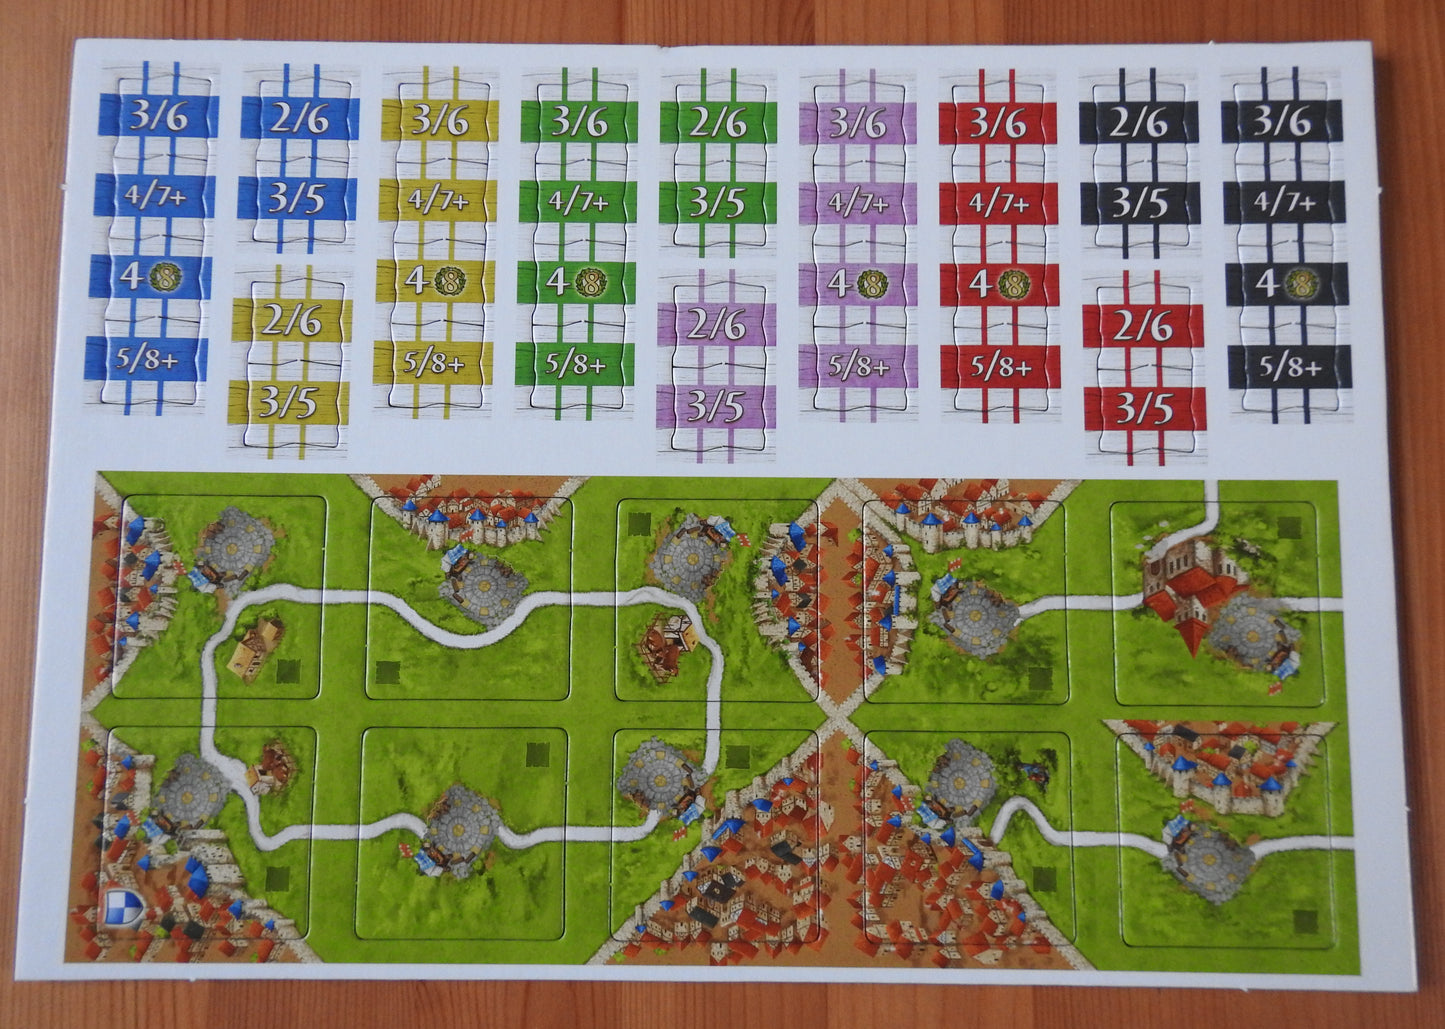 View showing all the tiles and bet chips included in this Carcassonne Bets mini expansion.